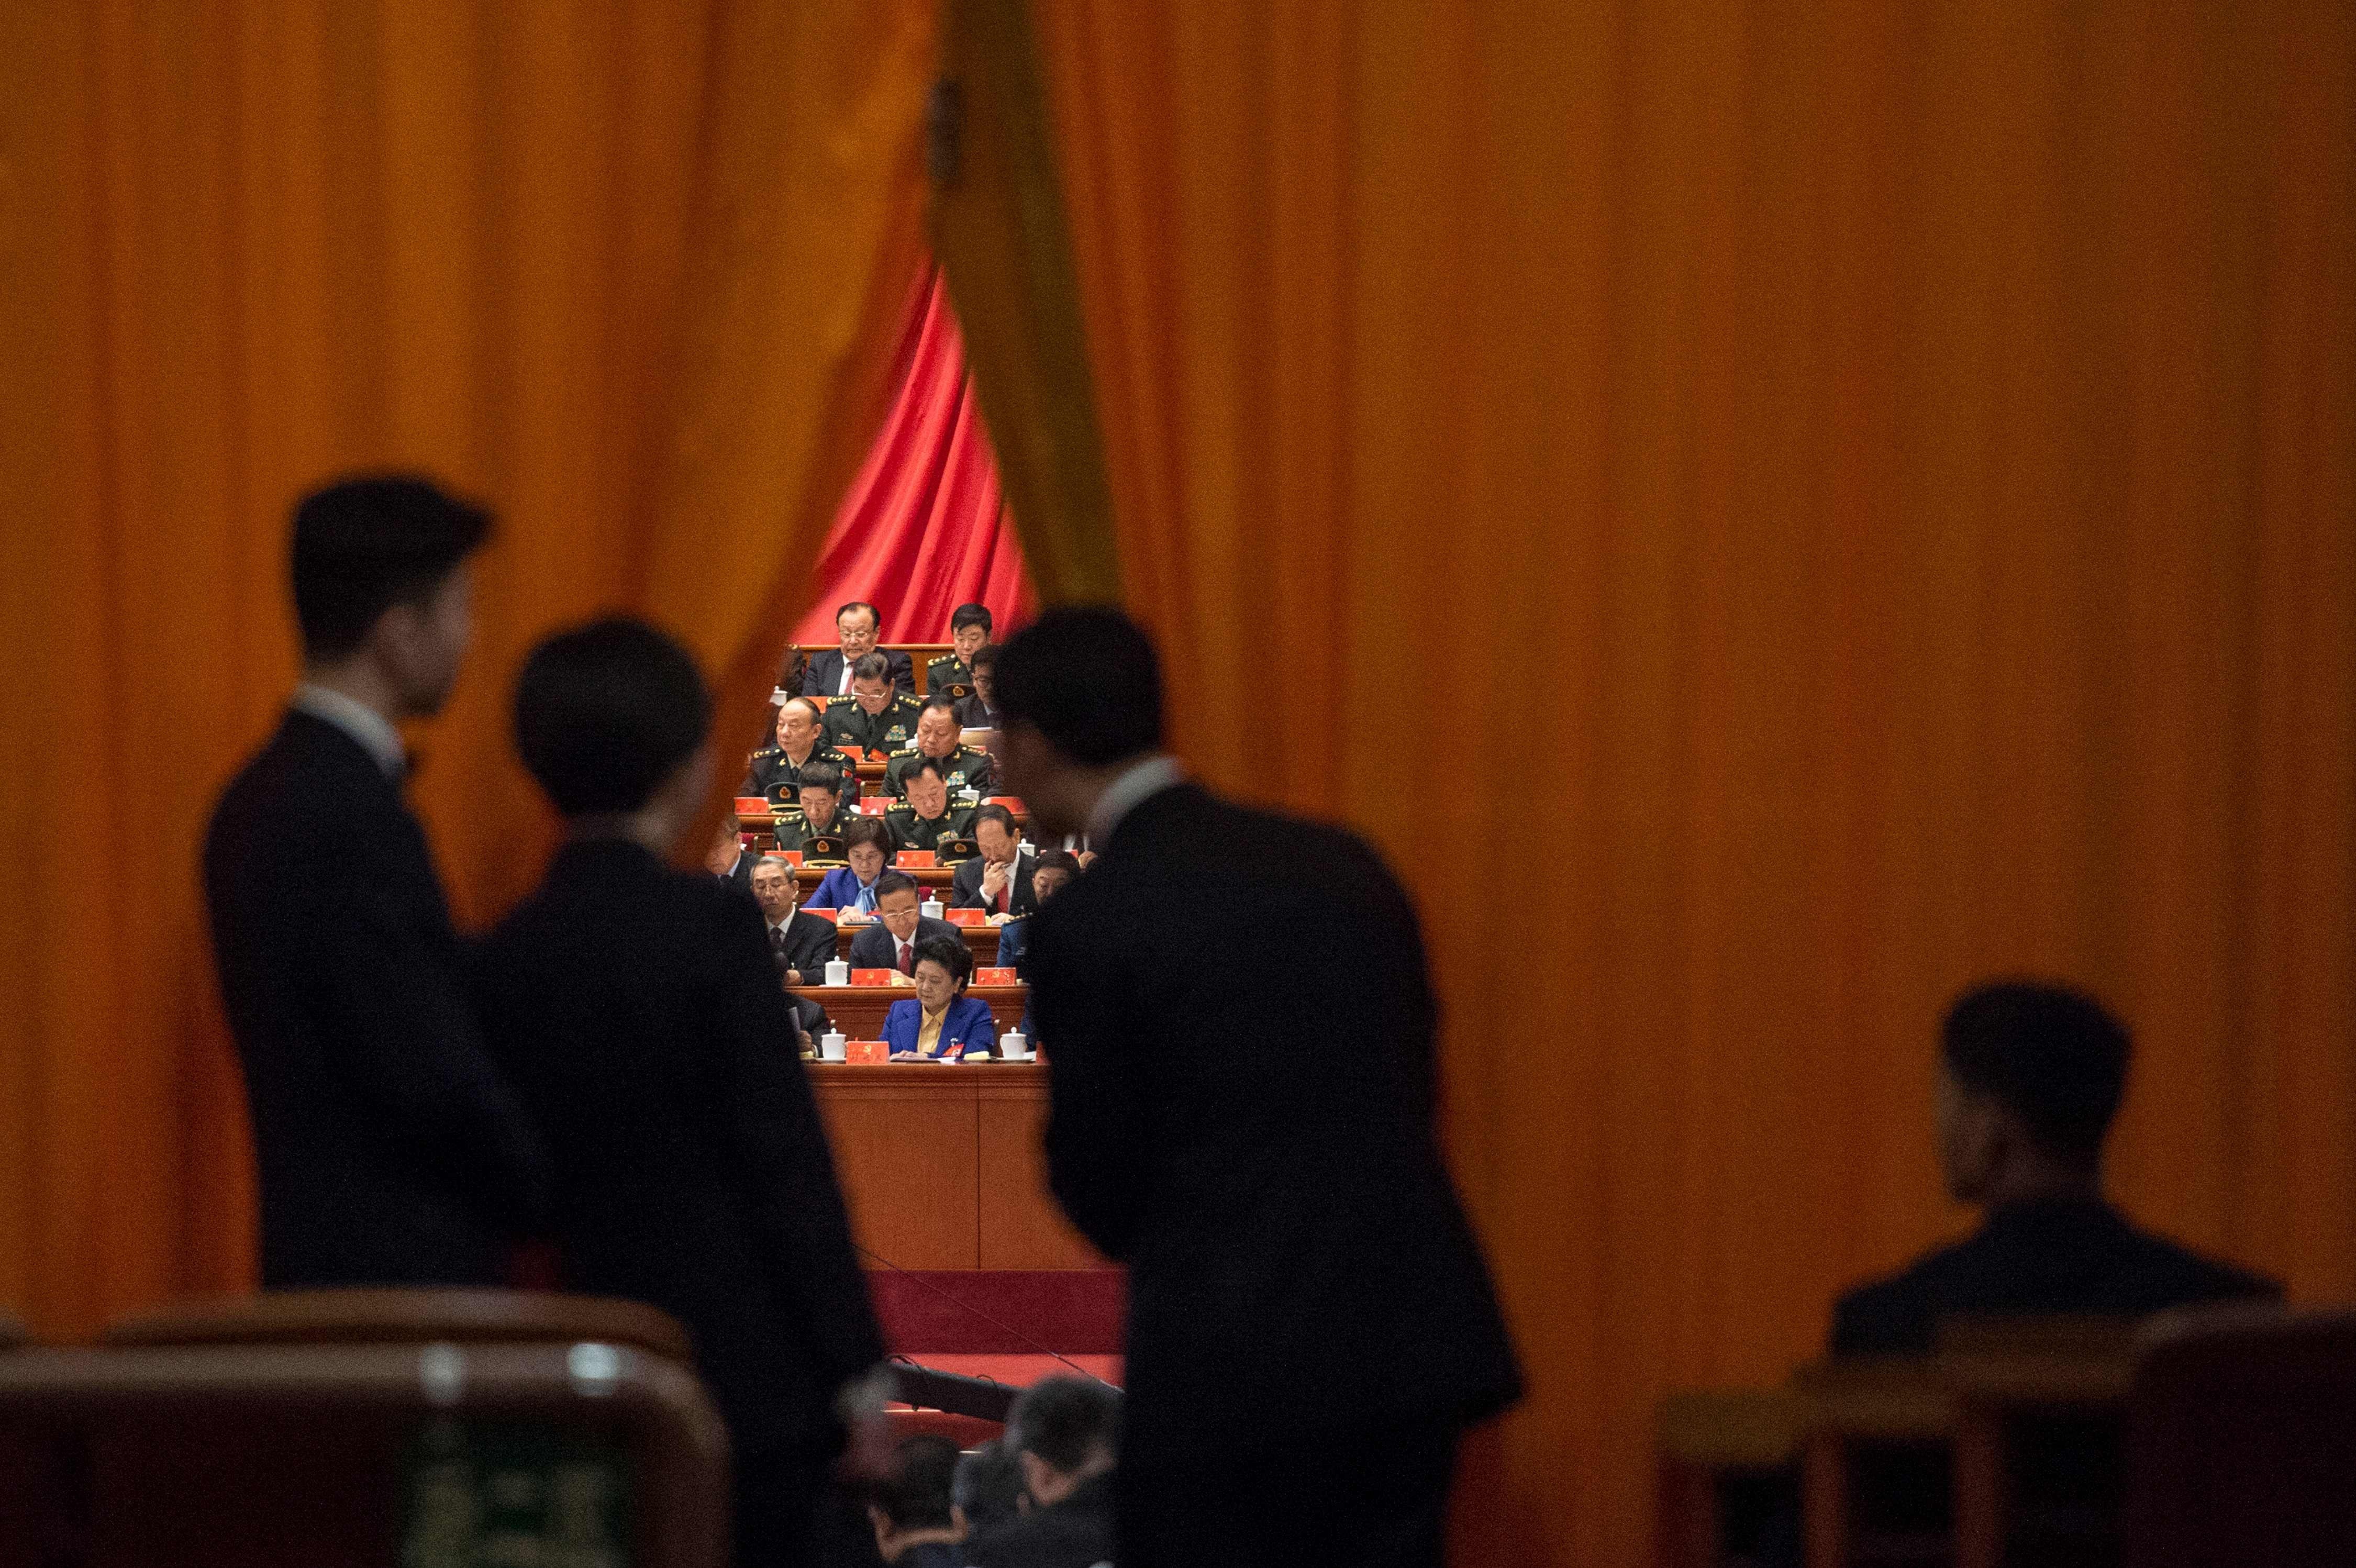 Security guards take a look at military delegates during President Xi Jinping’s speech at the 19th party congress in Bejing on October 18, in which he stressed the country’s many achievements and made clear that he believed China was on the precipice of becoming a “great” global power. Photo: AFP